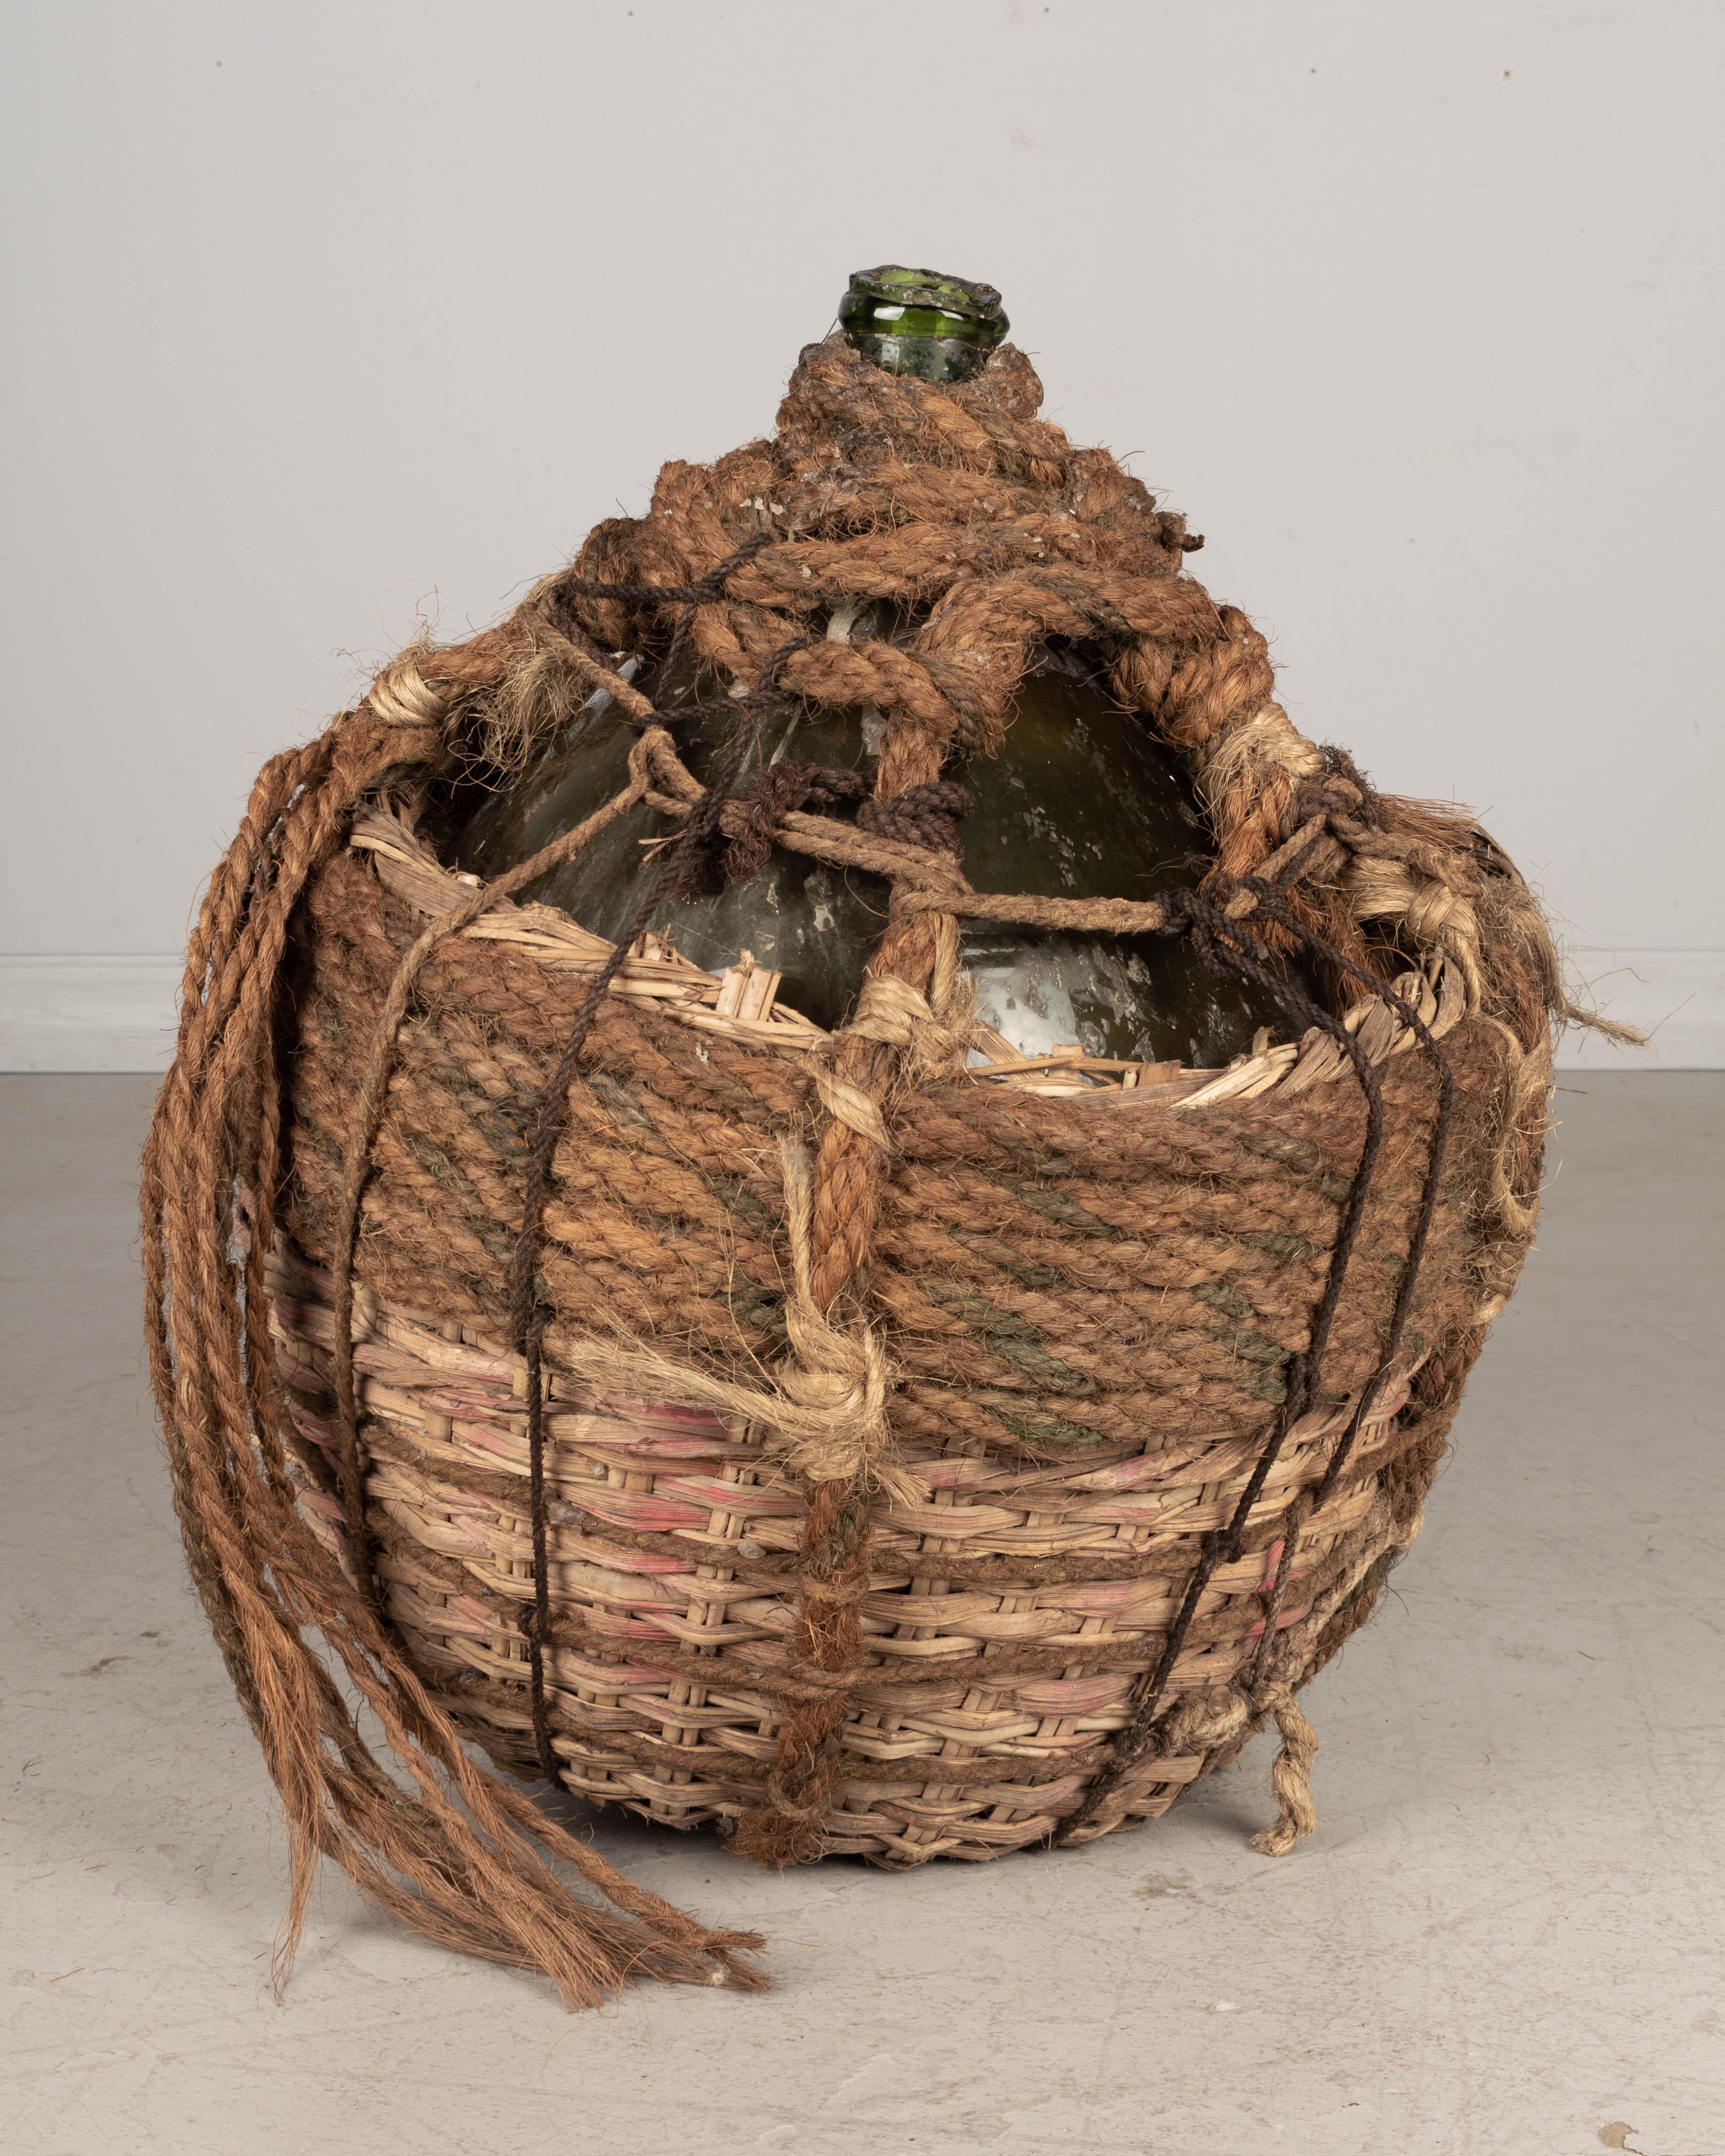 A large 19th century French globular form hand blown green glass Dame Jeanne, or demijohn, bottle encased in two layers of woven wicker and thick braided rope. Layers of different kinds of rope appear to have been added over the years creating an